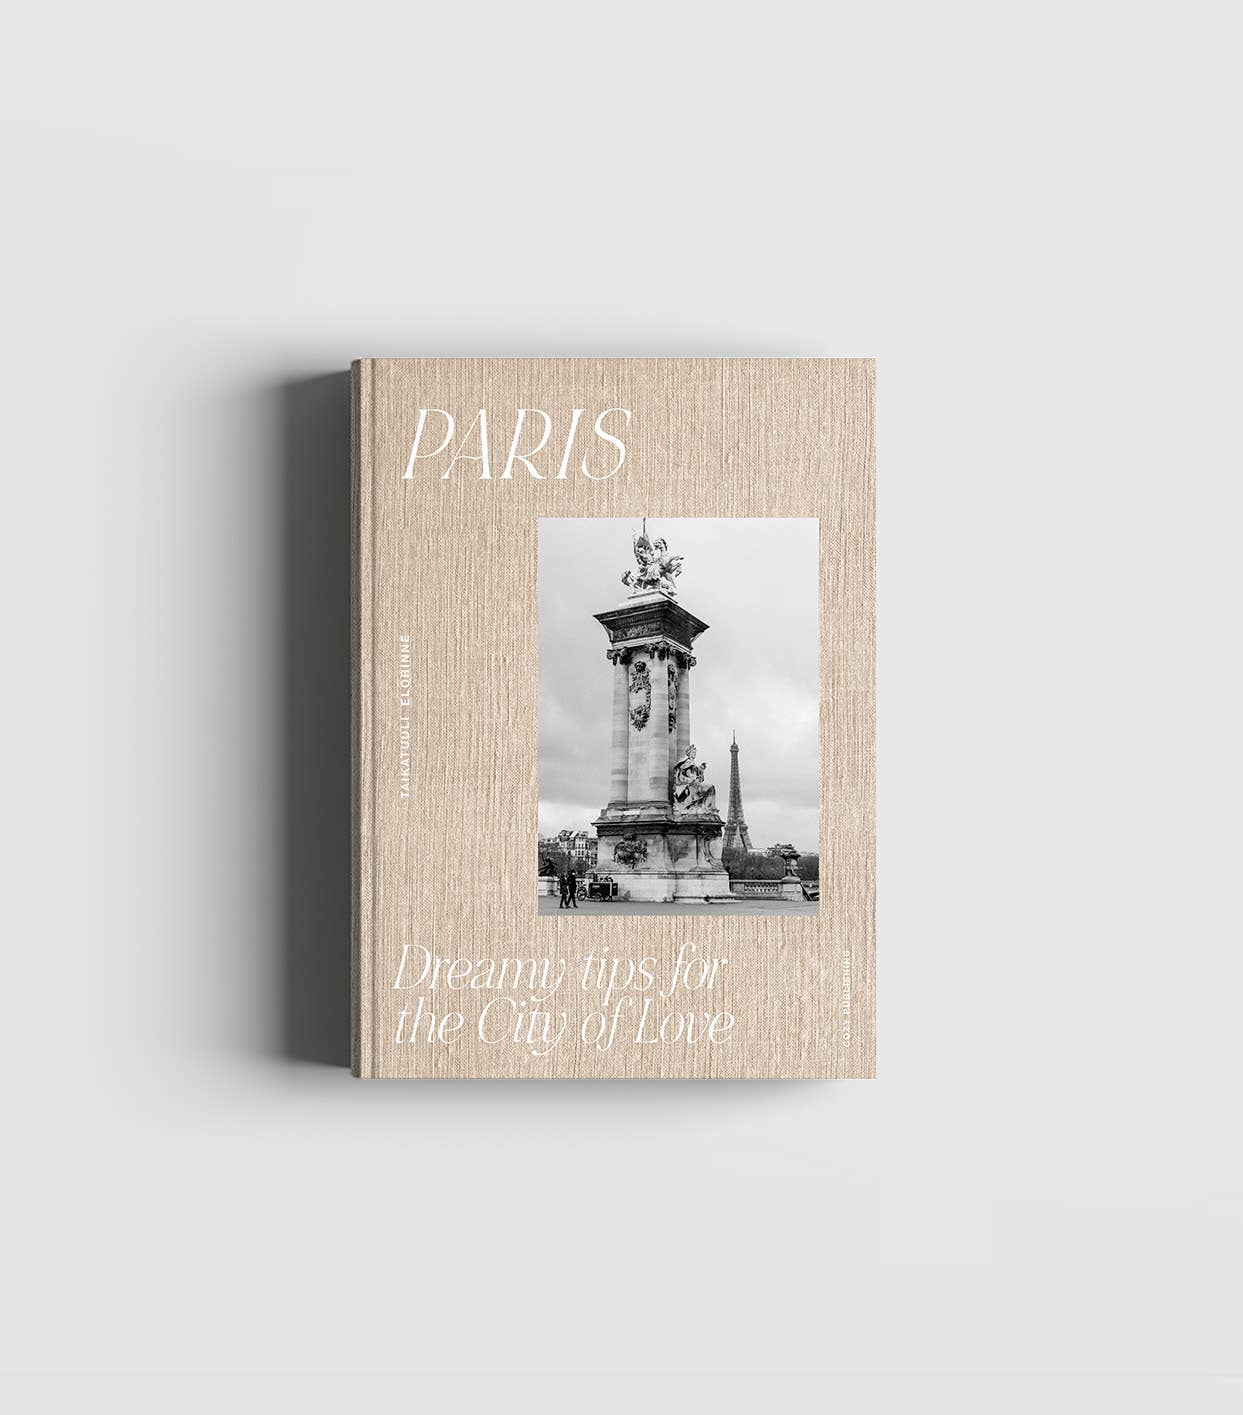 PARIS – Dreamy Tips for the City of Love